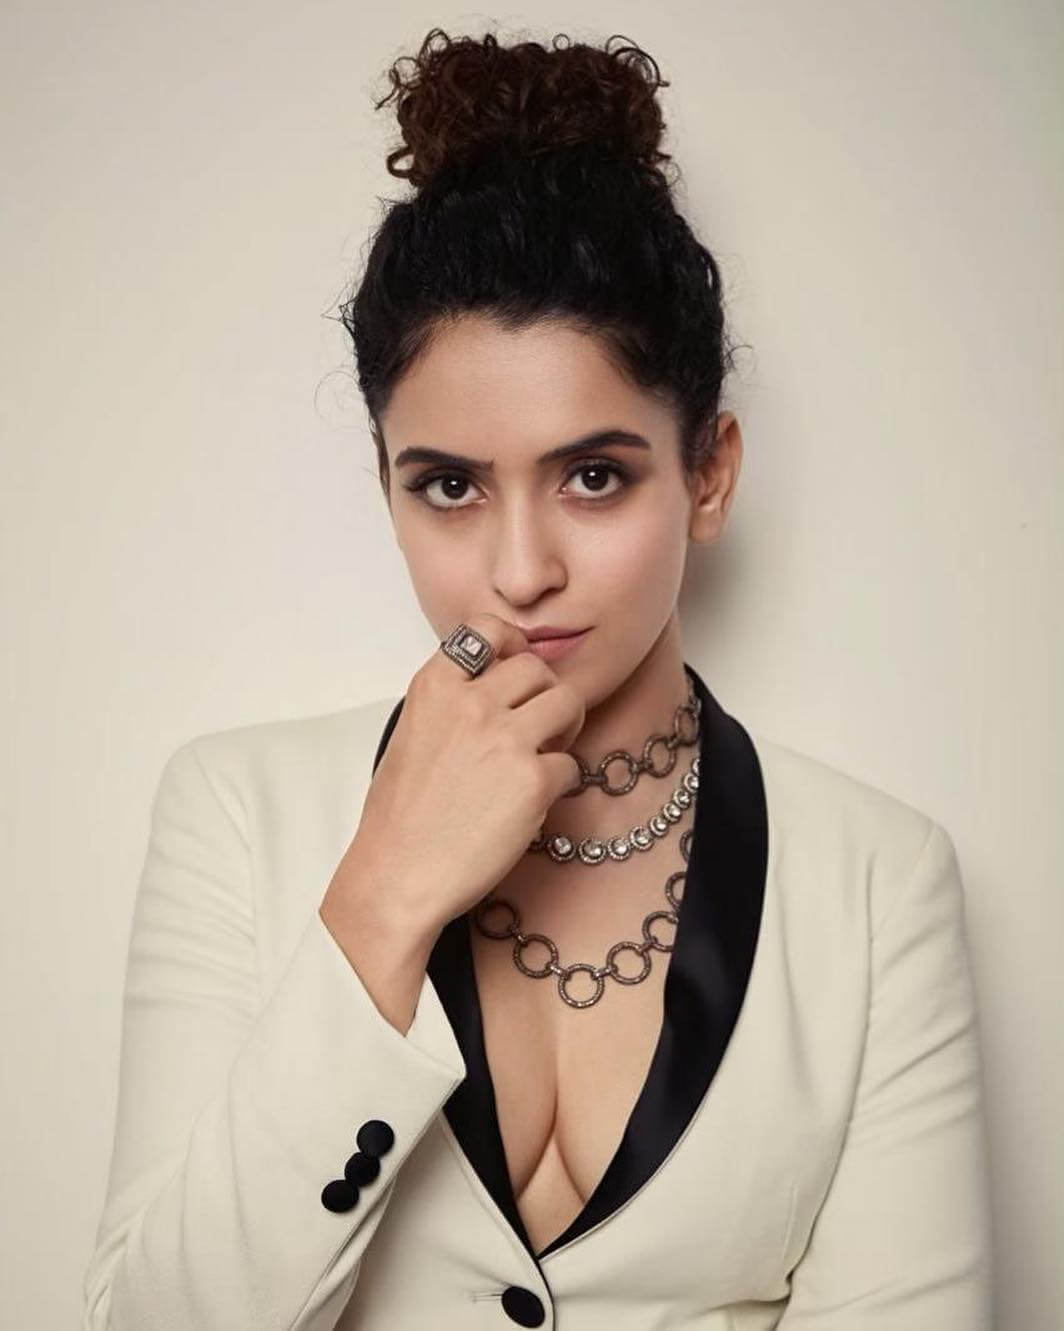 Hot Pictures Of Sanya Malhotra Which Are Going To Make You Want Her